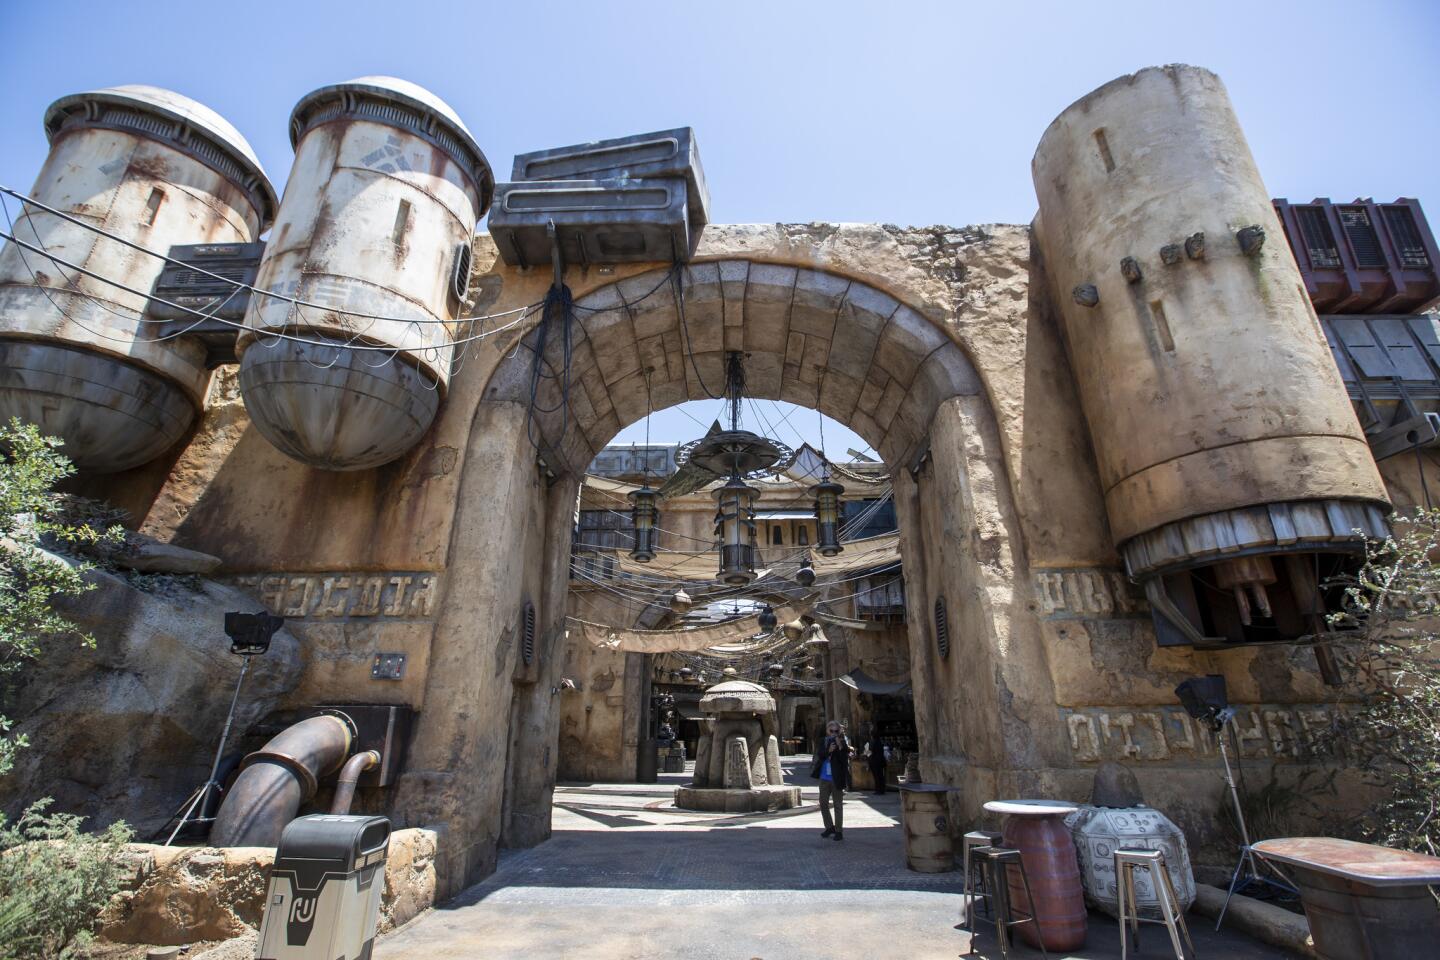 A view of the Marketplace as media members get a preview during the Star Wars: Galaxy's Edge Media Preview event at the Disneyland Resort in Anaheim, Calif., on May 29, 2019. (Allen J. Schaben / Los Angeles Times)